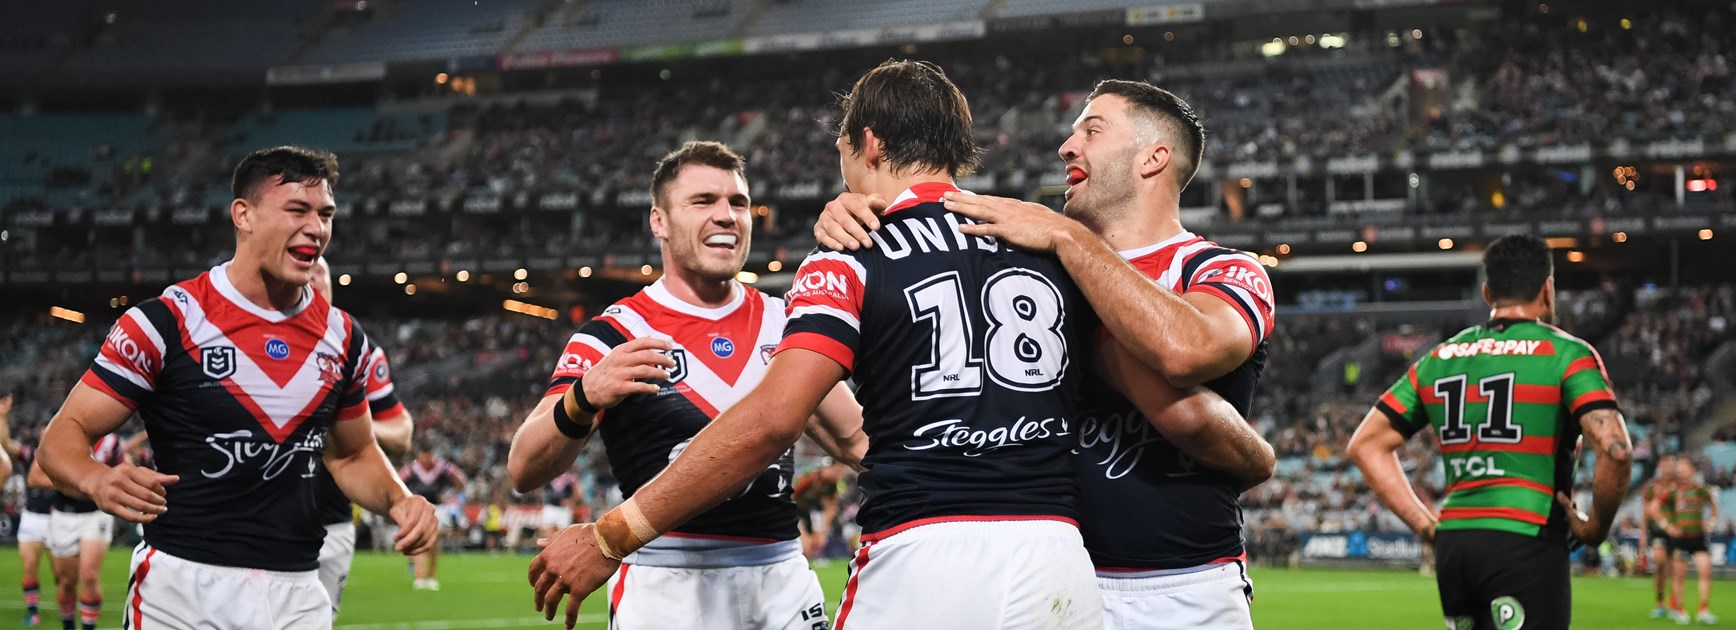 The Roosters celebrate.